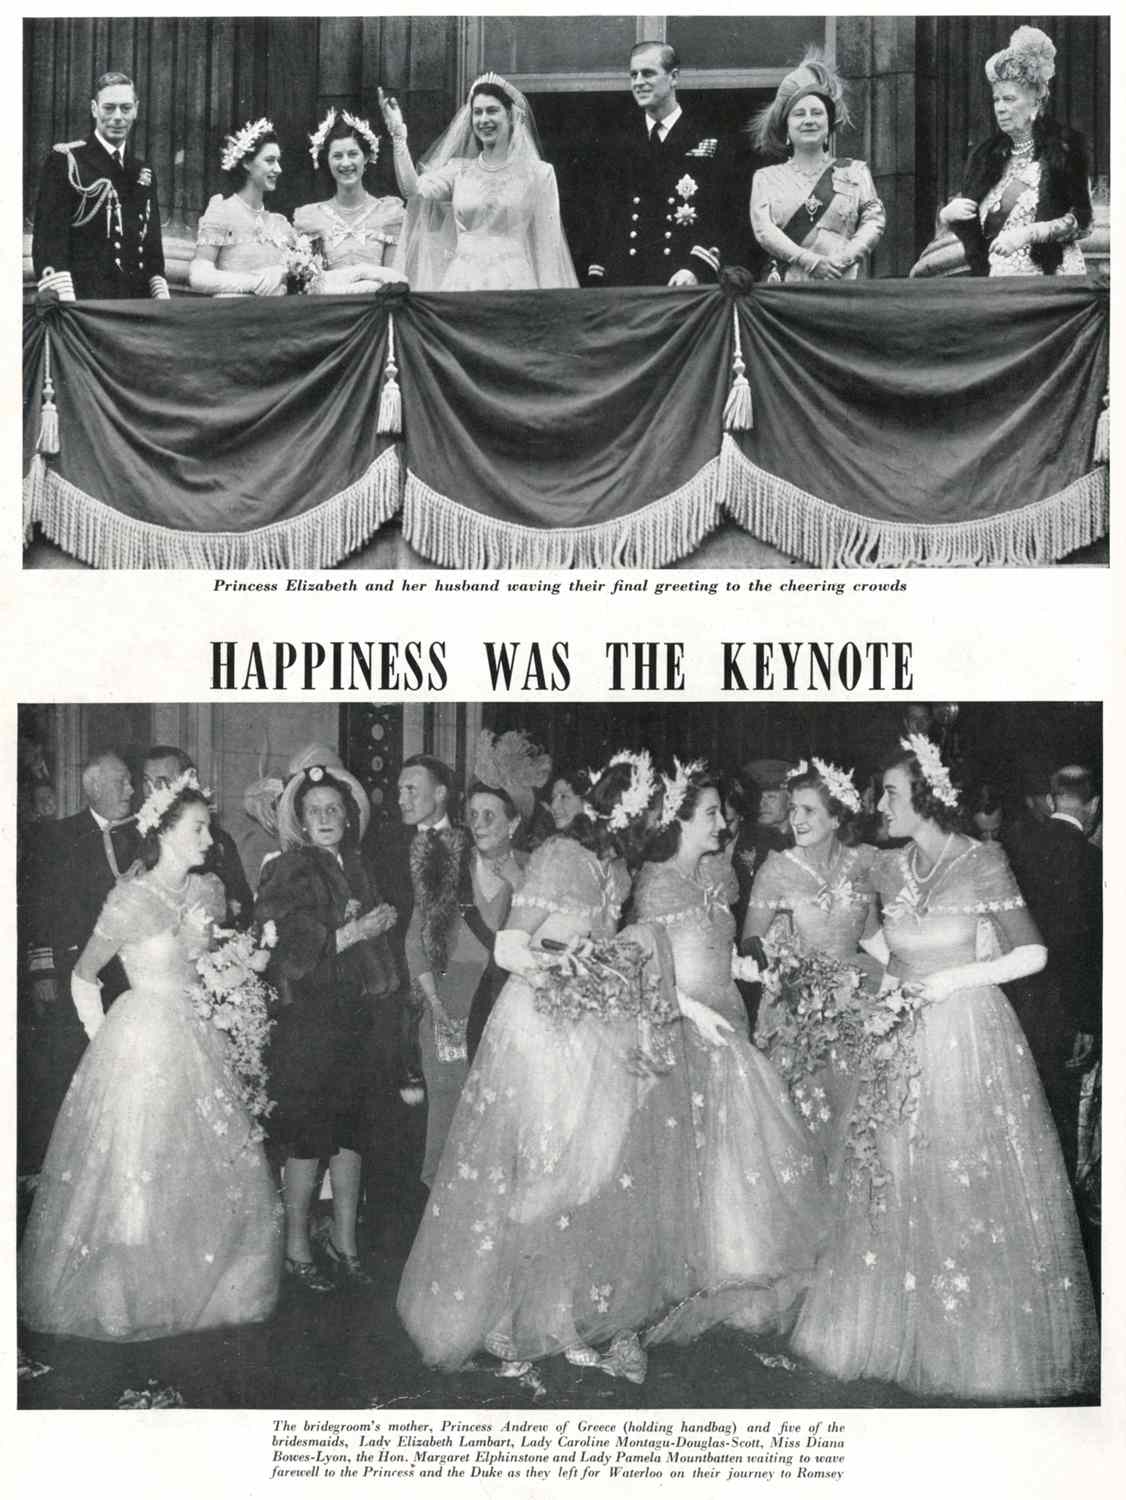  A page from The Tatler entitled, 'Happiness was the Keynote' with two photographs of the wedding day of Princess Elizabeth (Queen Elizabeth II) and Lieutenant Philip Mountbatten (Prince Philip, Duke of Edinburgh) on 20 November 1947